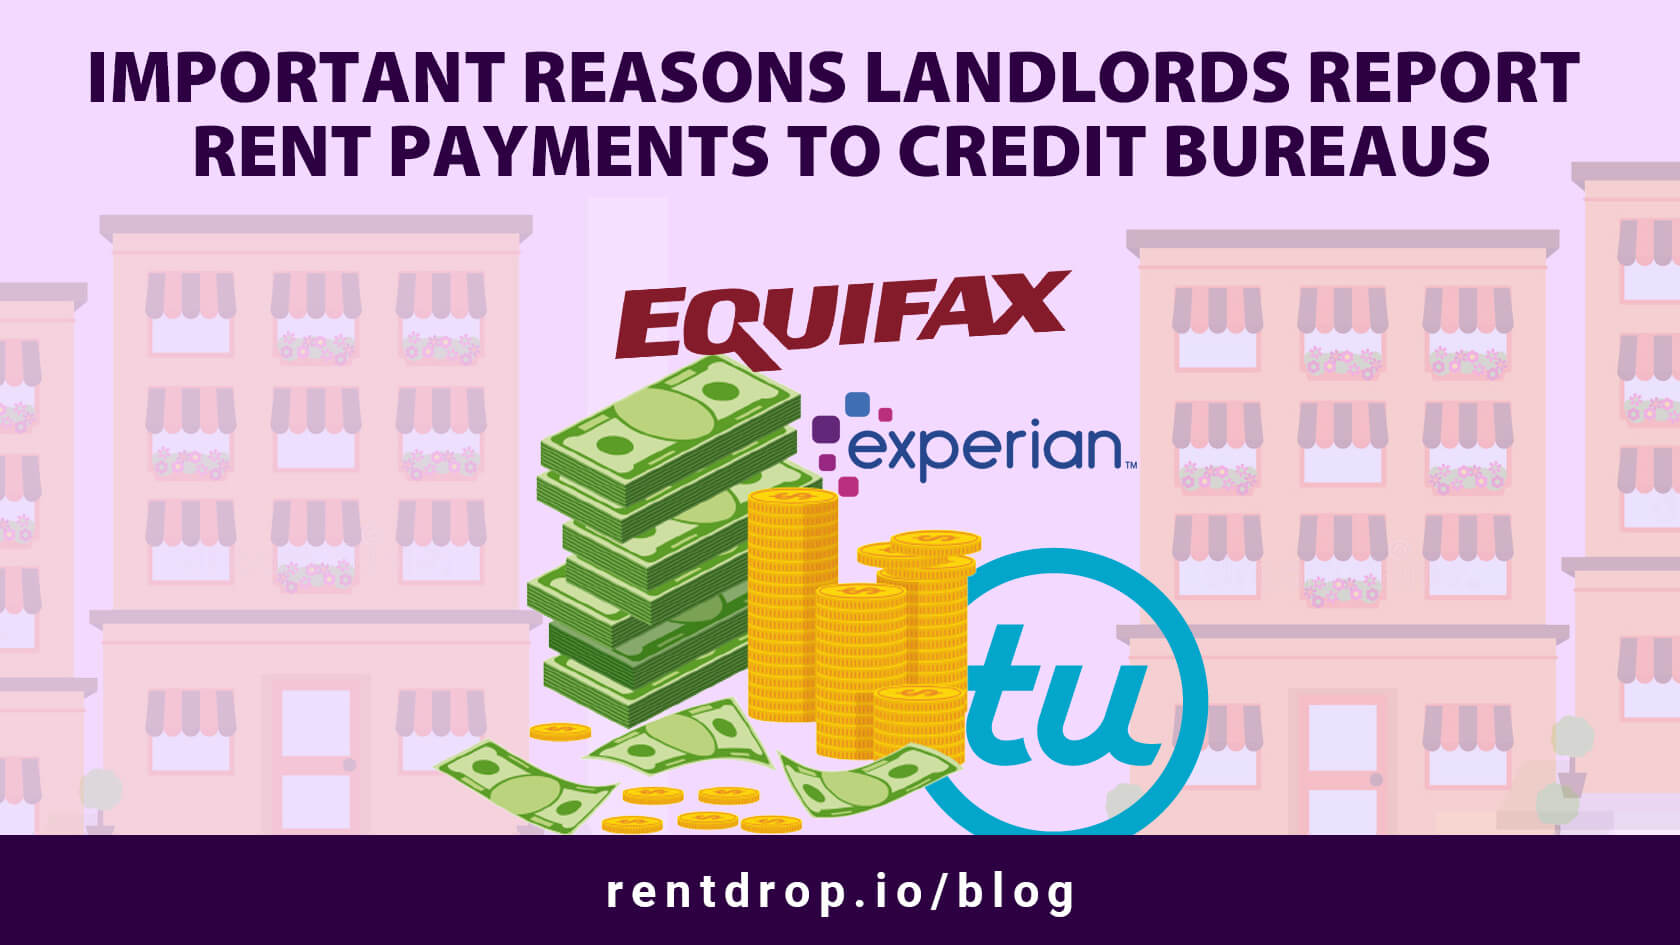 image of Important Reasons Landlords Report Rent Payments to Credit Bureaus